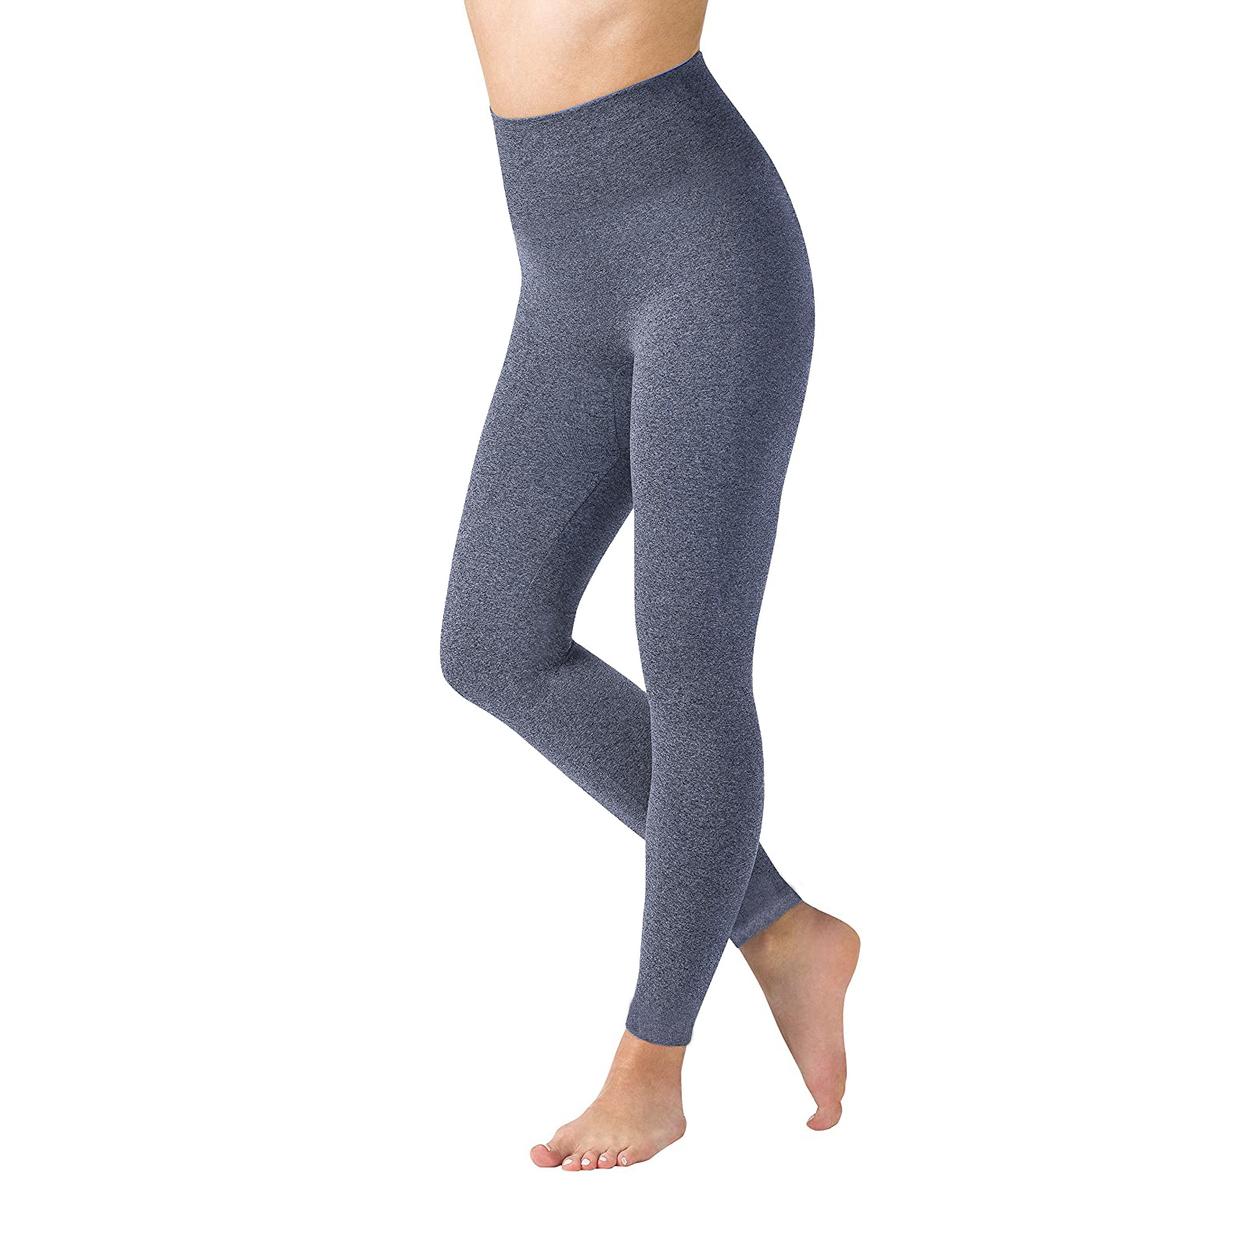 Women's High Waisted Ultra-Soft Fleece Lined Warm Marled Leggings(Available In Plus Sizes) - Charcoal, Small